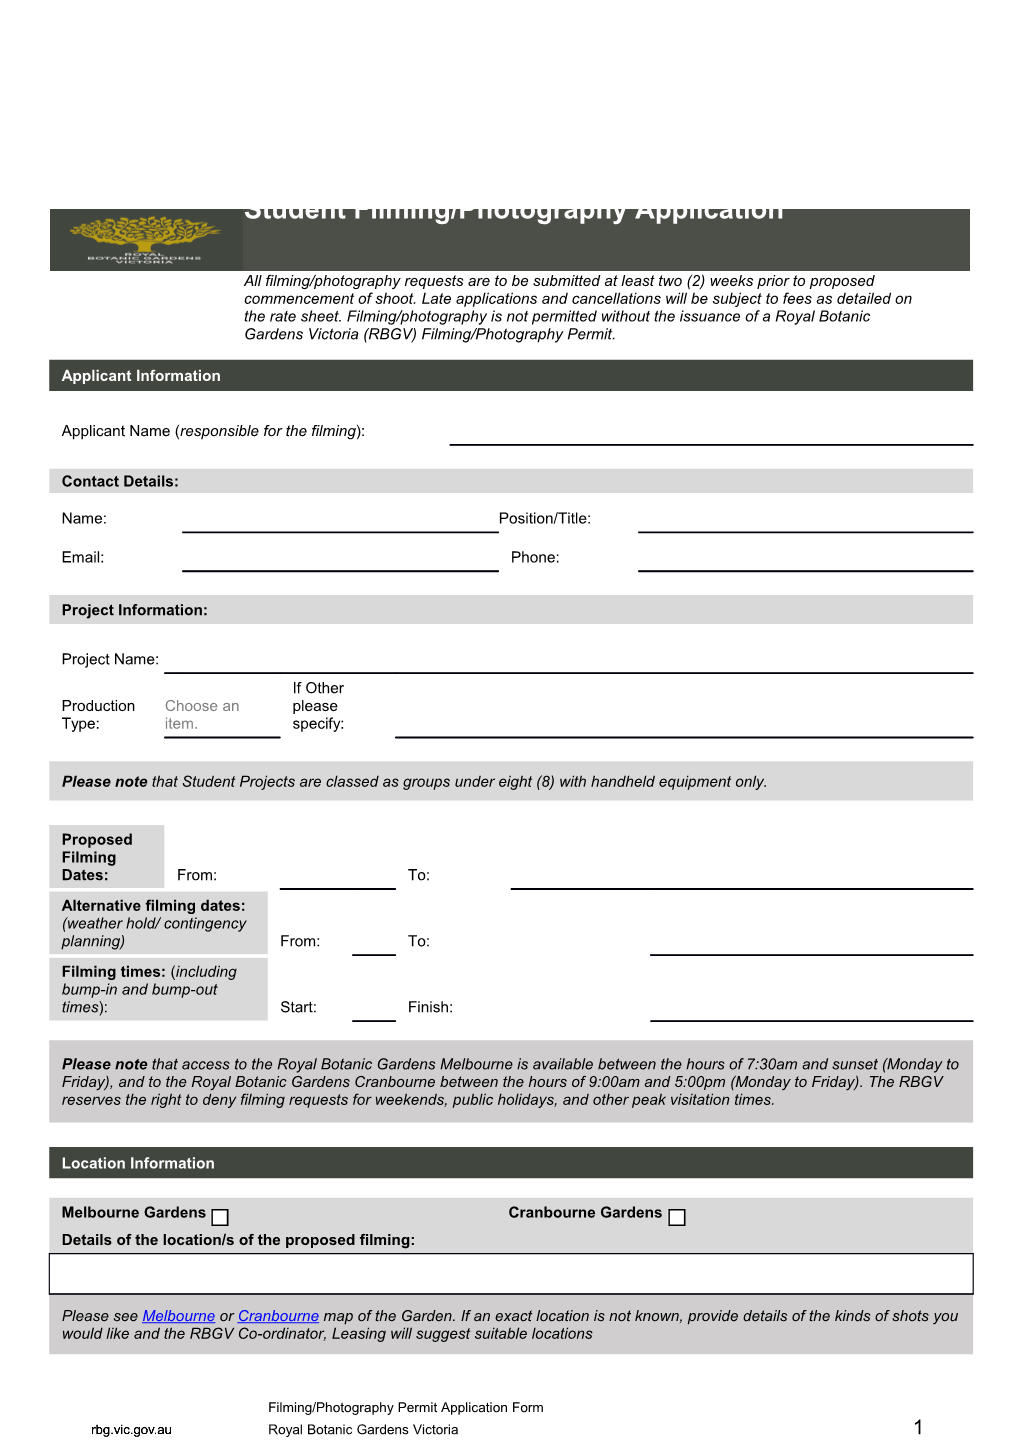 Filming/Photography Permit Application Form